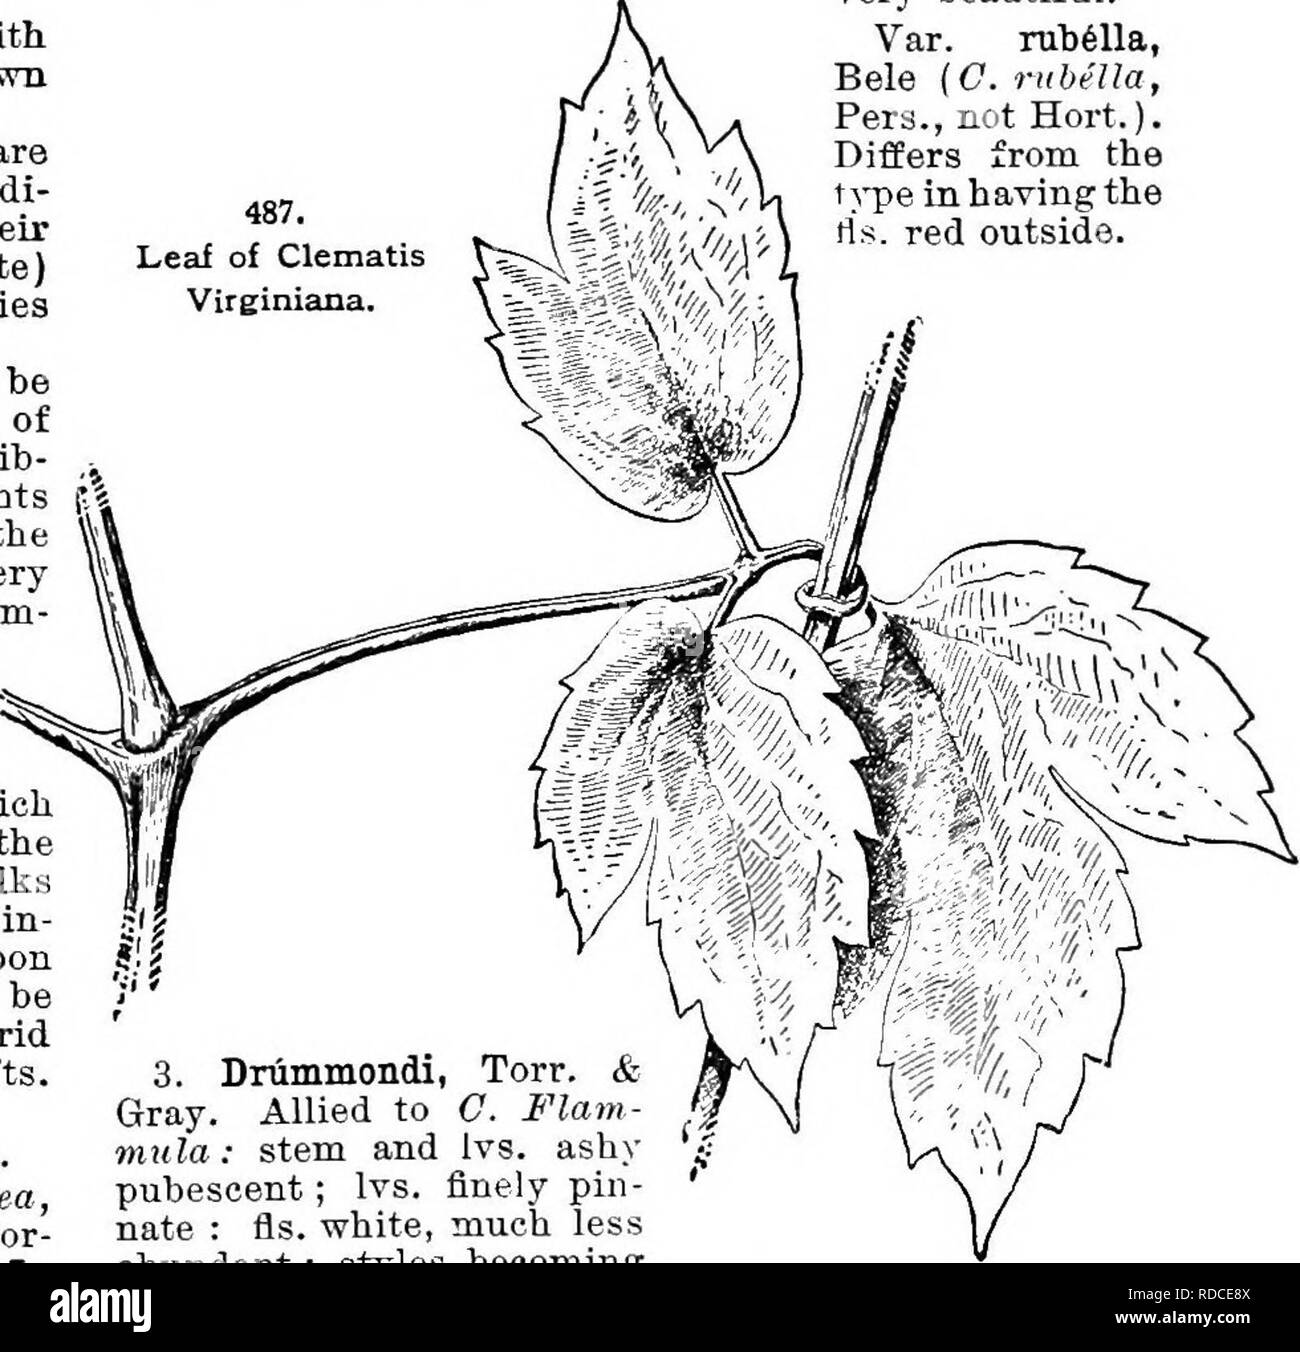 . Cyclopedia of American horticulture, comprising suggestions for cultivation of horticultural plants, descriptions of the species of fruits, vegetables, flowers, and ornamental plants sold in the United States and Canada, together with geographical and biographical sketches. Gardening. CLEMATIS CLEMATIS 329 disease, is delightfully fragrant, and so floriferous that the blossoms form a dense sheet of bloom, remaining in full beauty for several weeks. The foliage is very thick and heavy, thus making it very desirable for covering porches and arbors. Crispa (blue) and Coccinea (red) are varietie Stock Photo